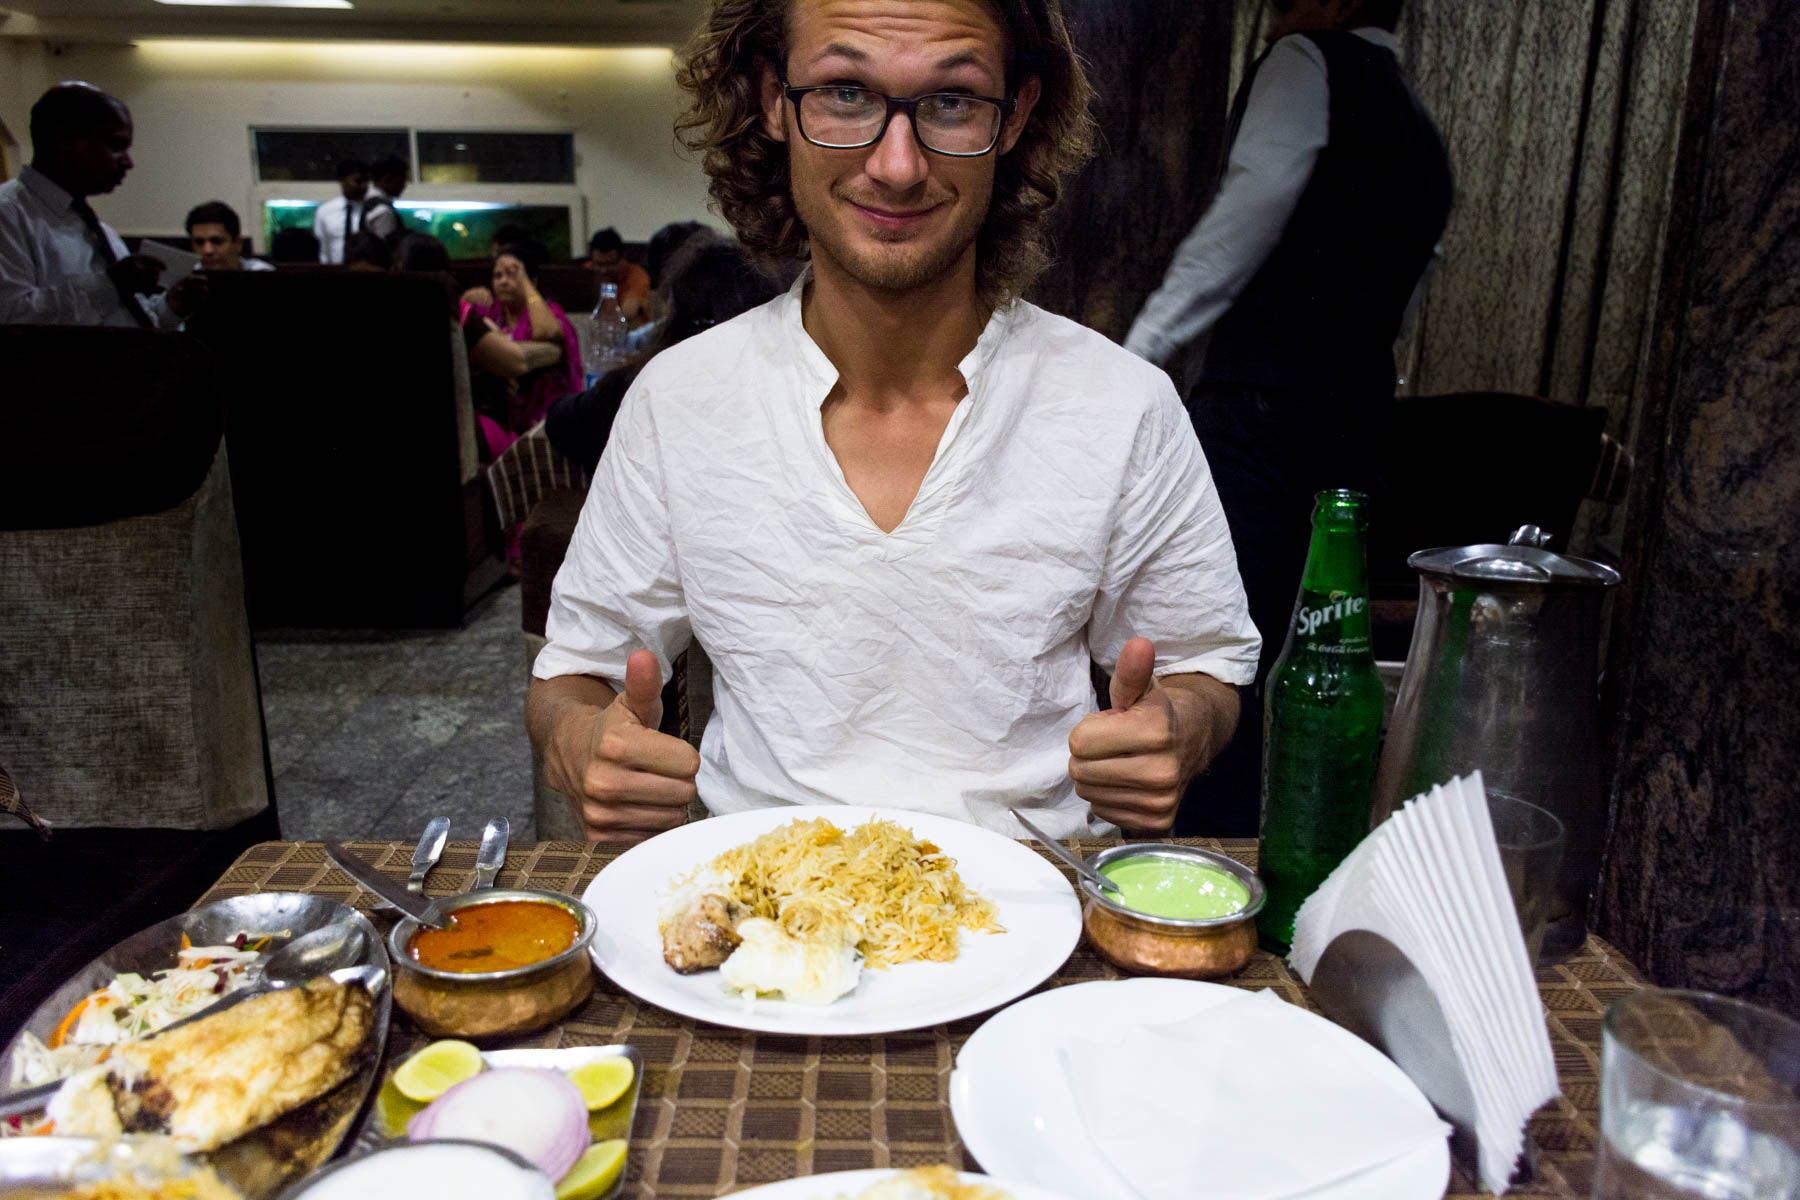 Where and what to eat in Hyderabad's Old City - Sebas eating biryani at Hotel Shadab in Hyderabad, India - Lost With Purpose